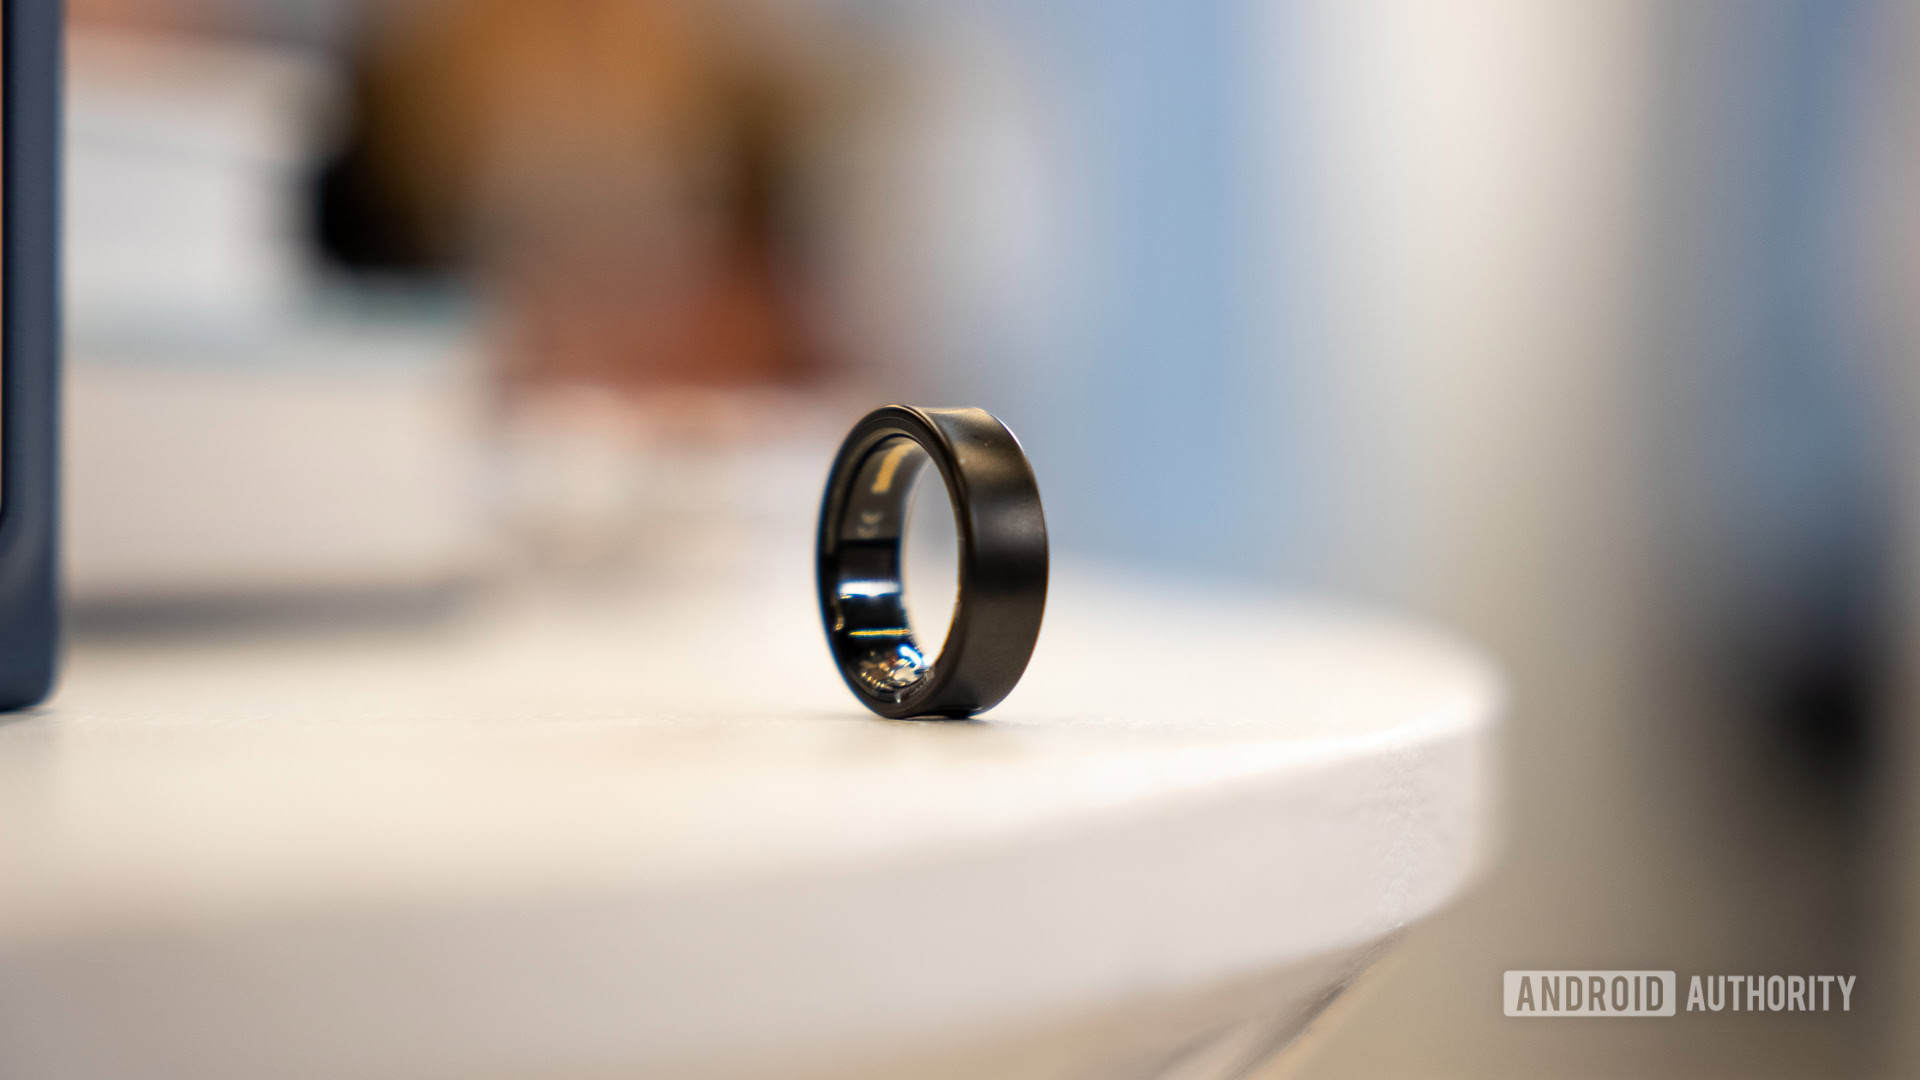 A Black Titanium Samsung Galaxy Ring rests on a white surface.